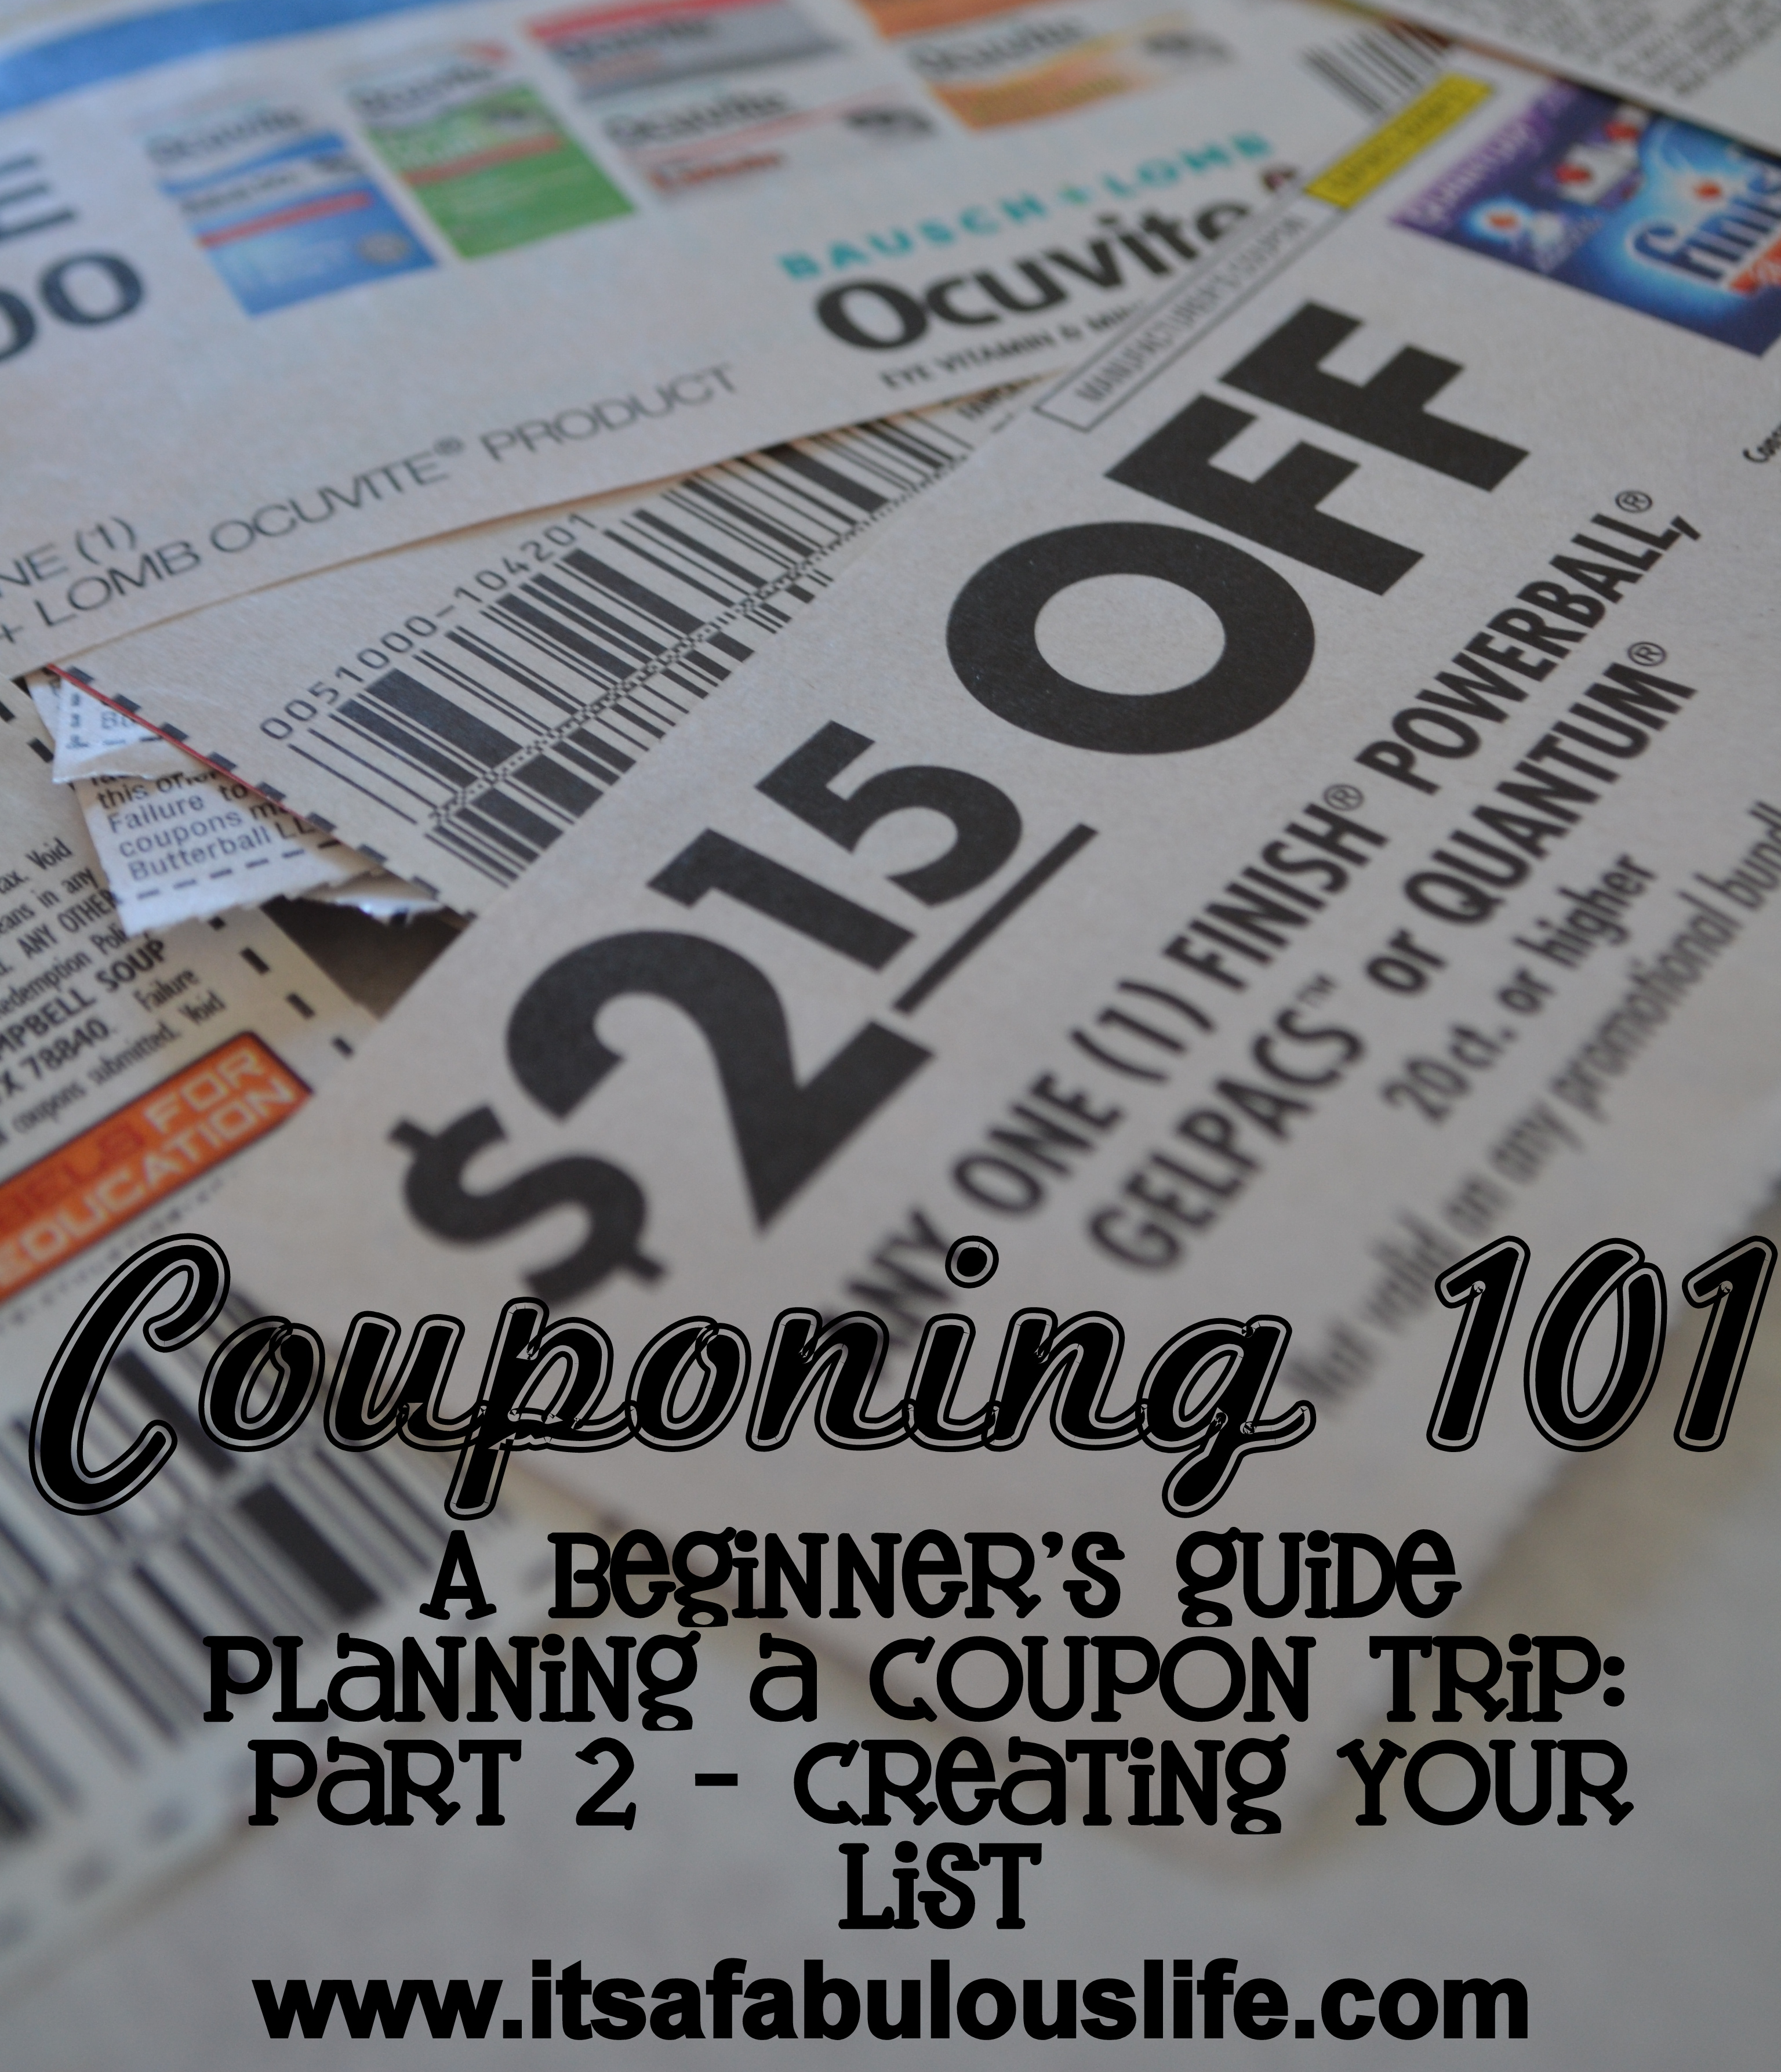 couponing 101 planning a coupon trip creating your list